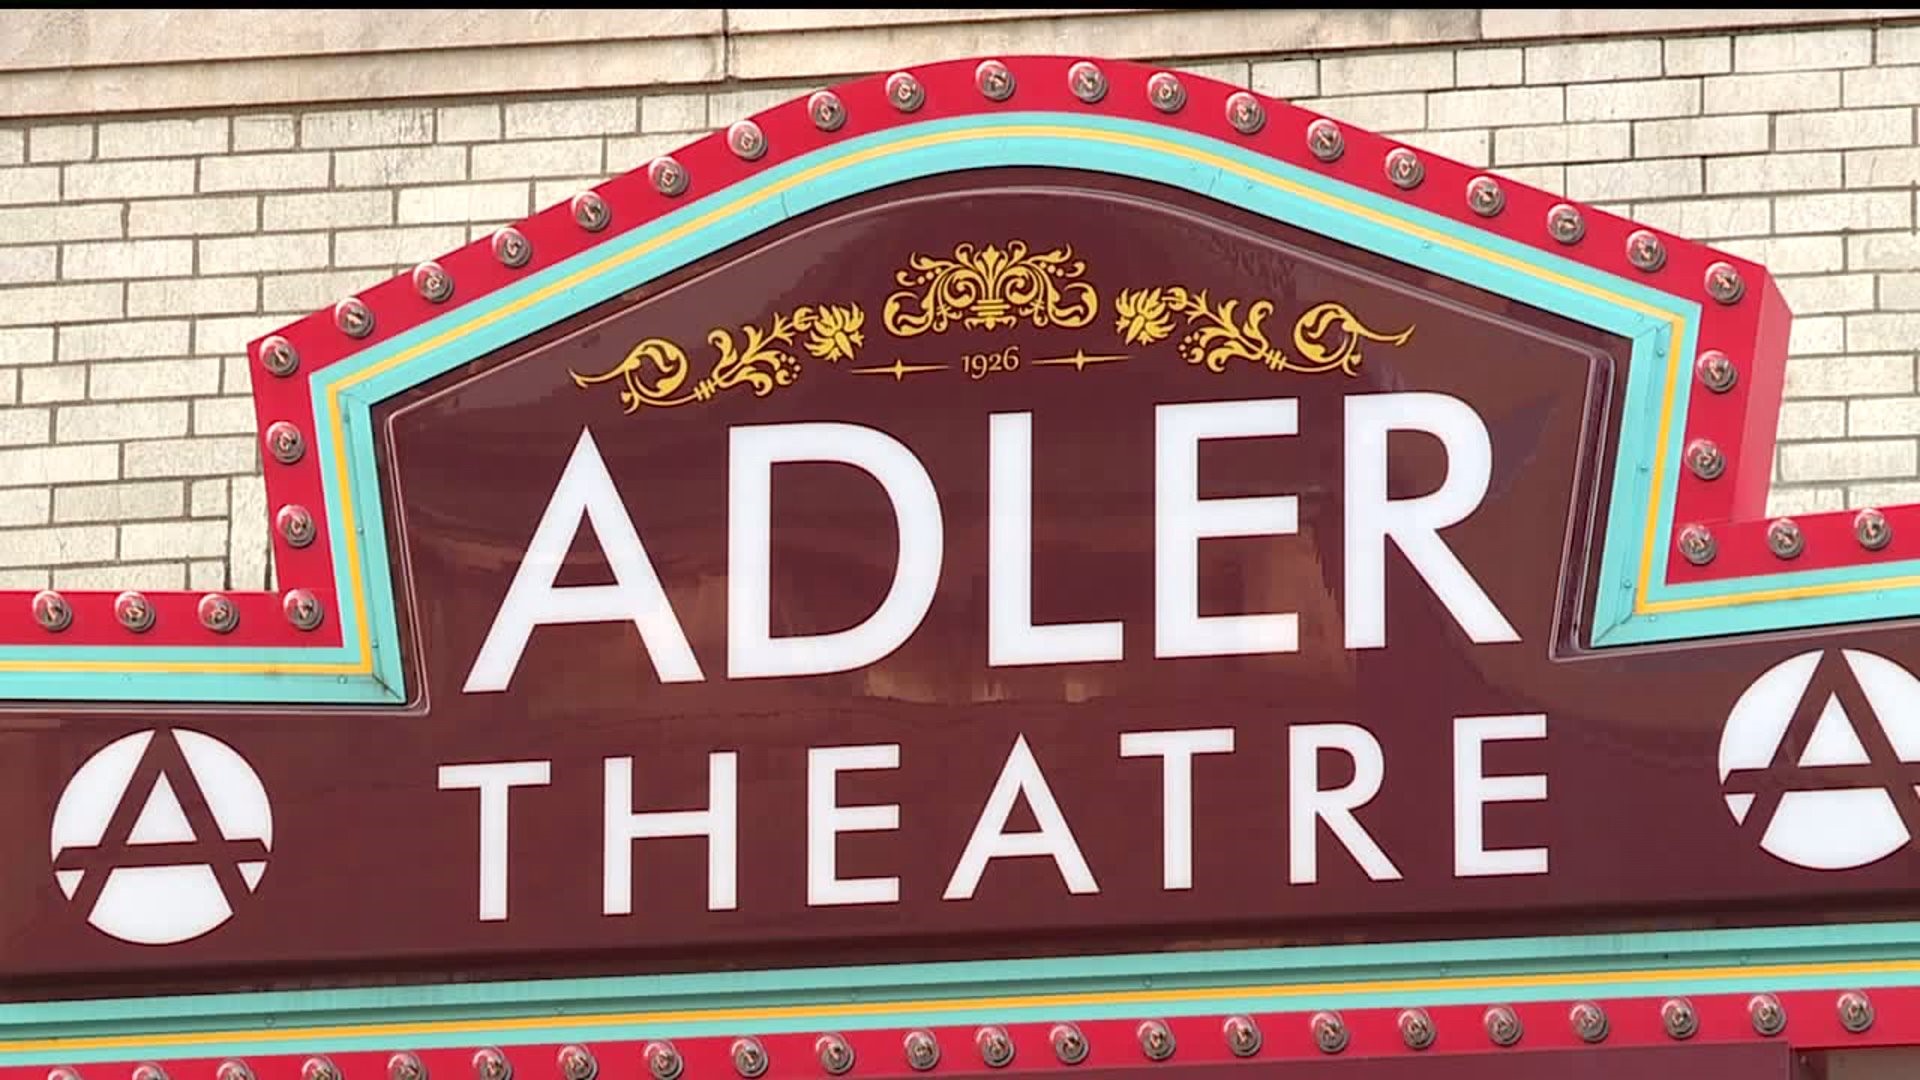 Adler Theater gets recognized for its sign